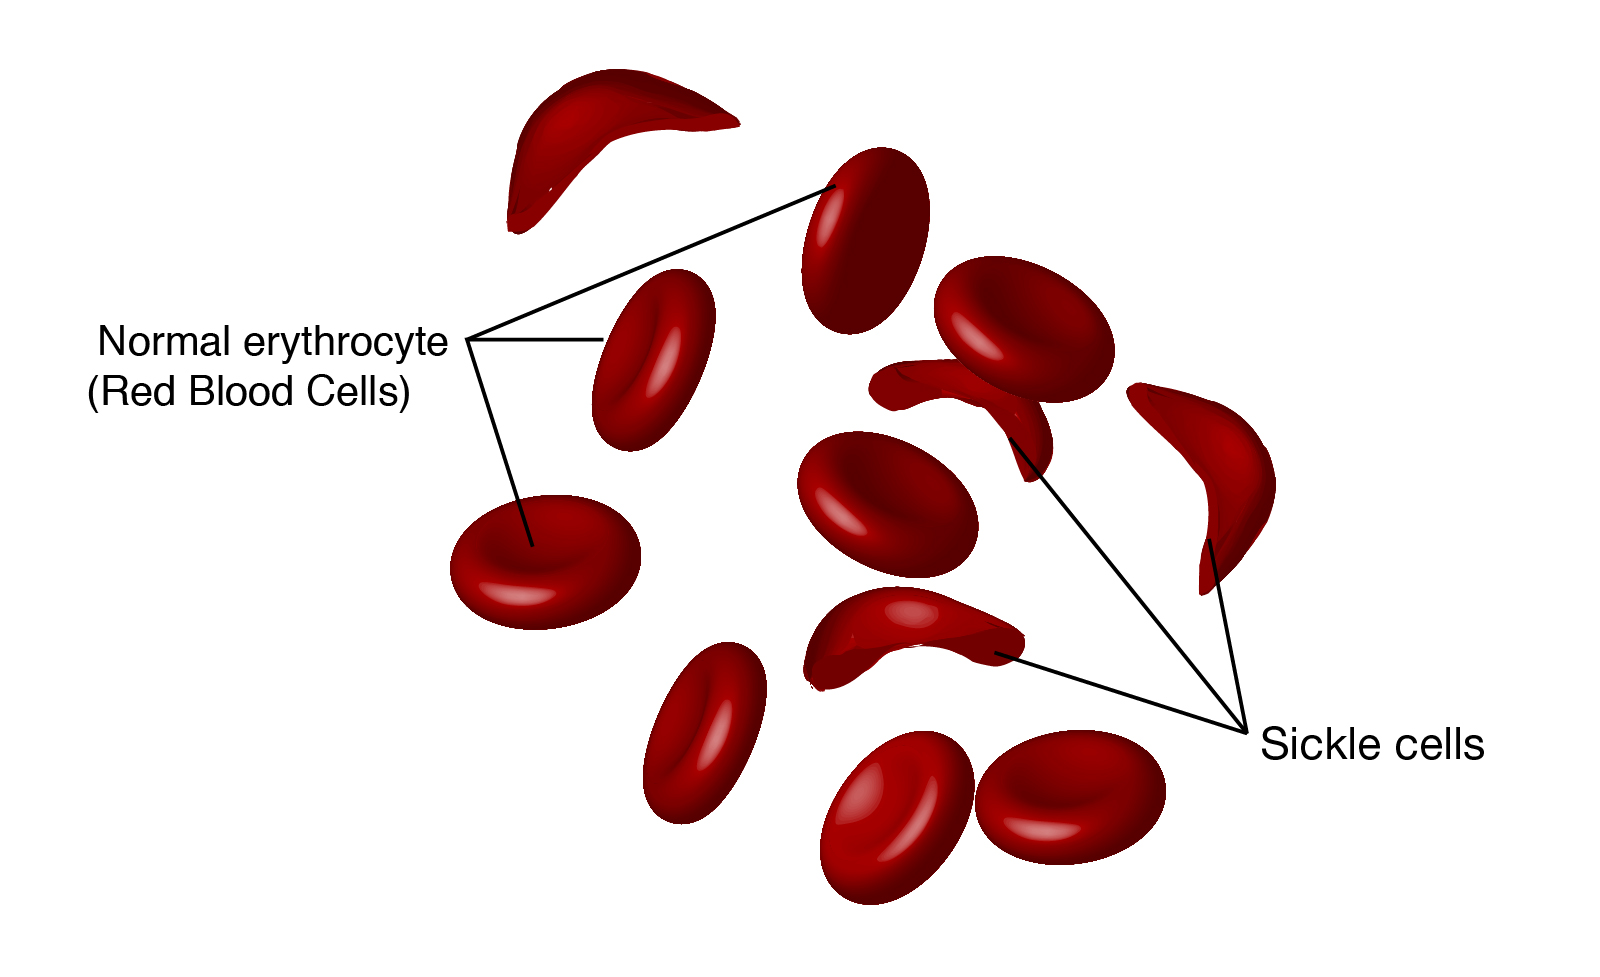 primary research article on sickle cell anemia